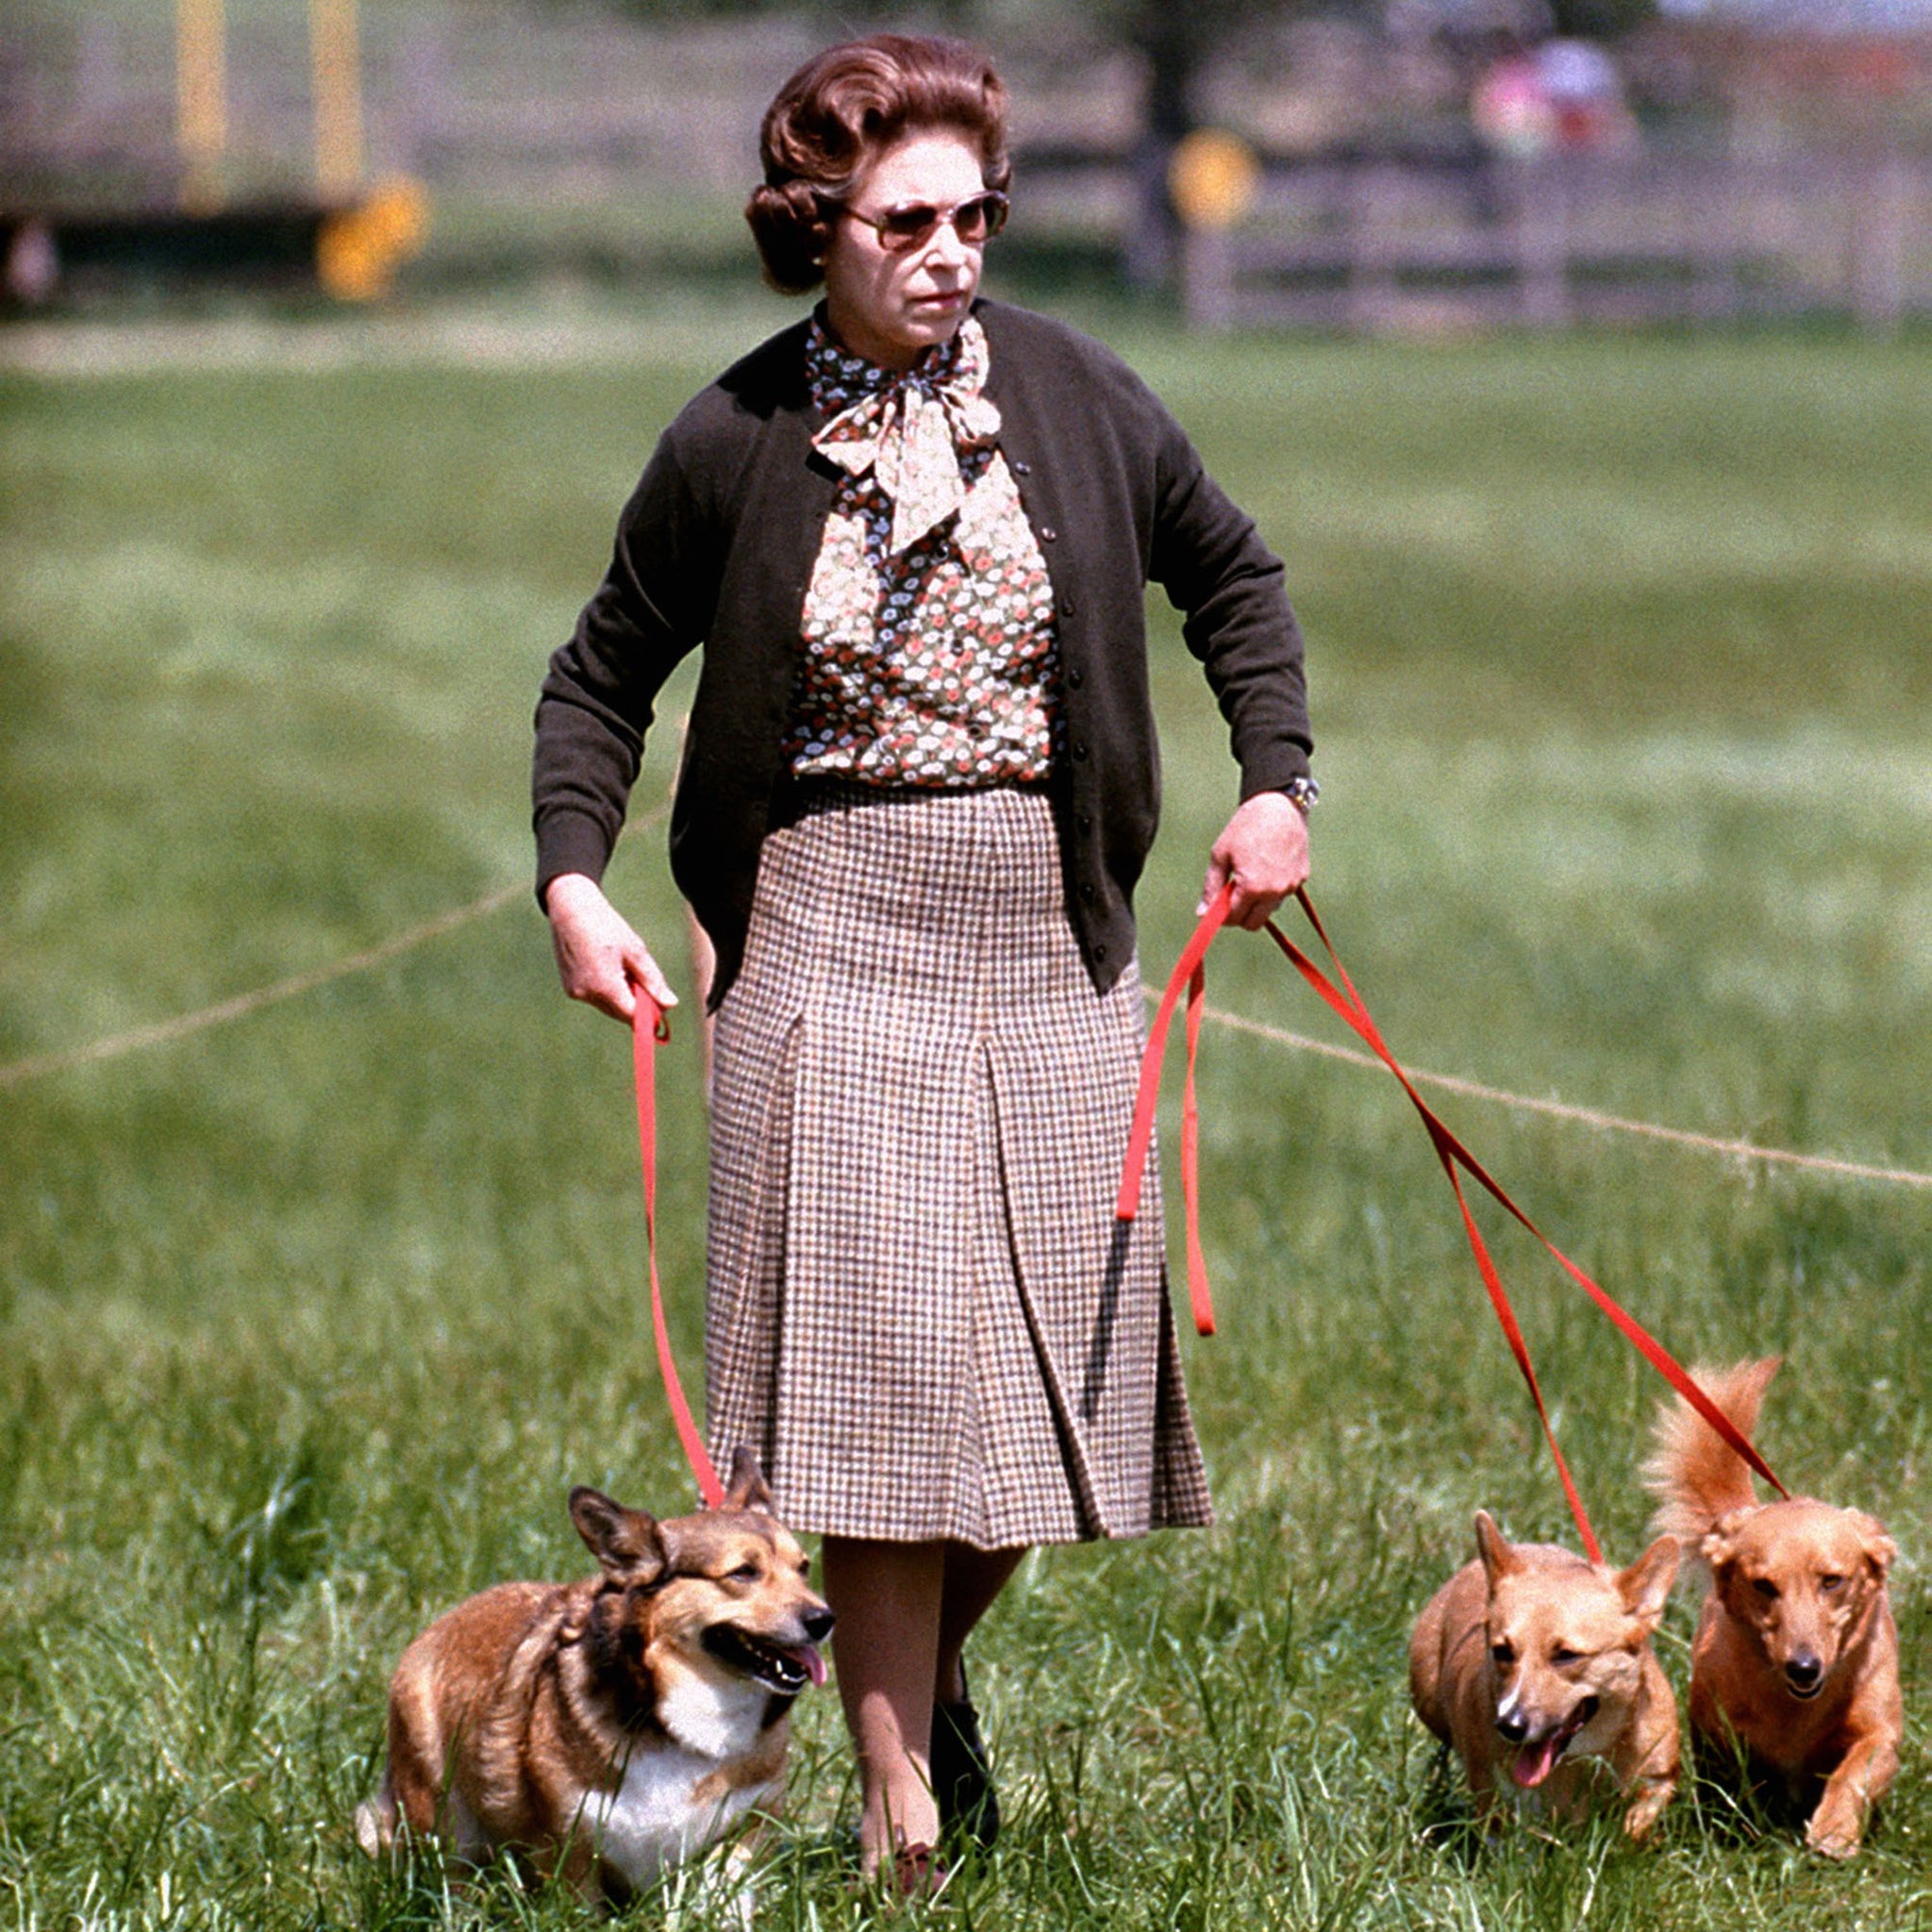 Queen Elizabeth II with some of her corgis walking the Cross Country course during the second day of the Windsor Horse Trials. The monarch is responsible for introducing a new breed of dog known as the ‘dorgi’ when her corgi Tiny was mated with a dachshund sausage dog called Pipkin which belonged to Princess Margaret, 1980